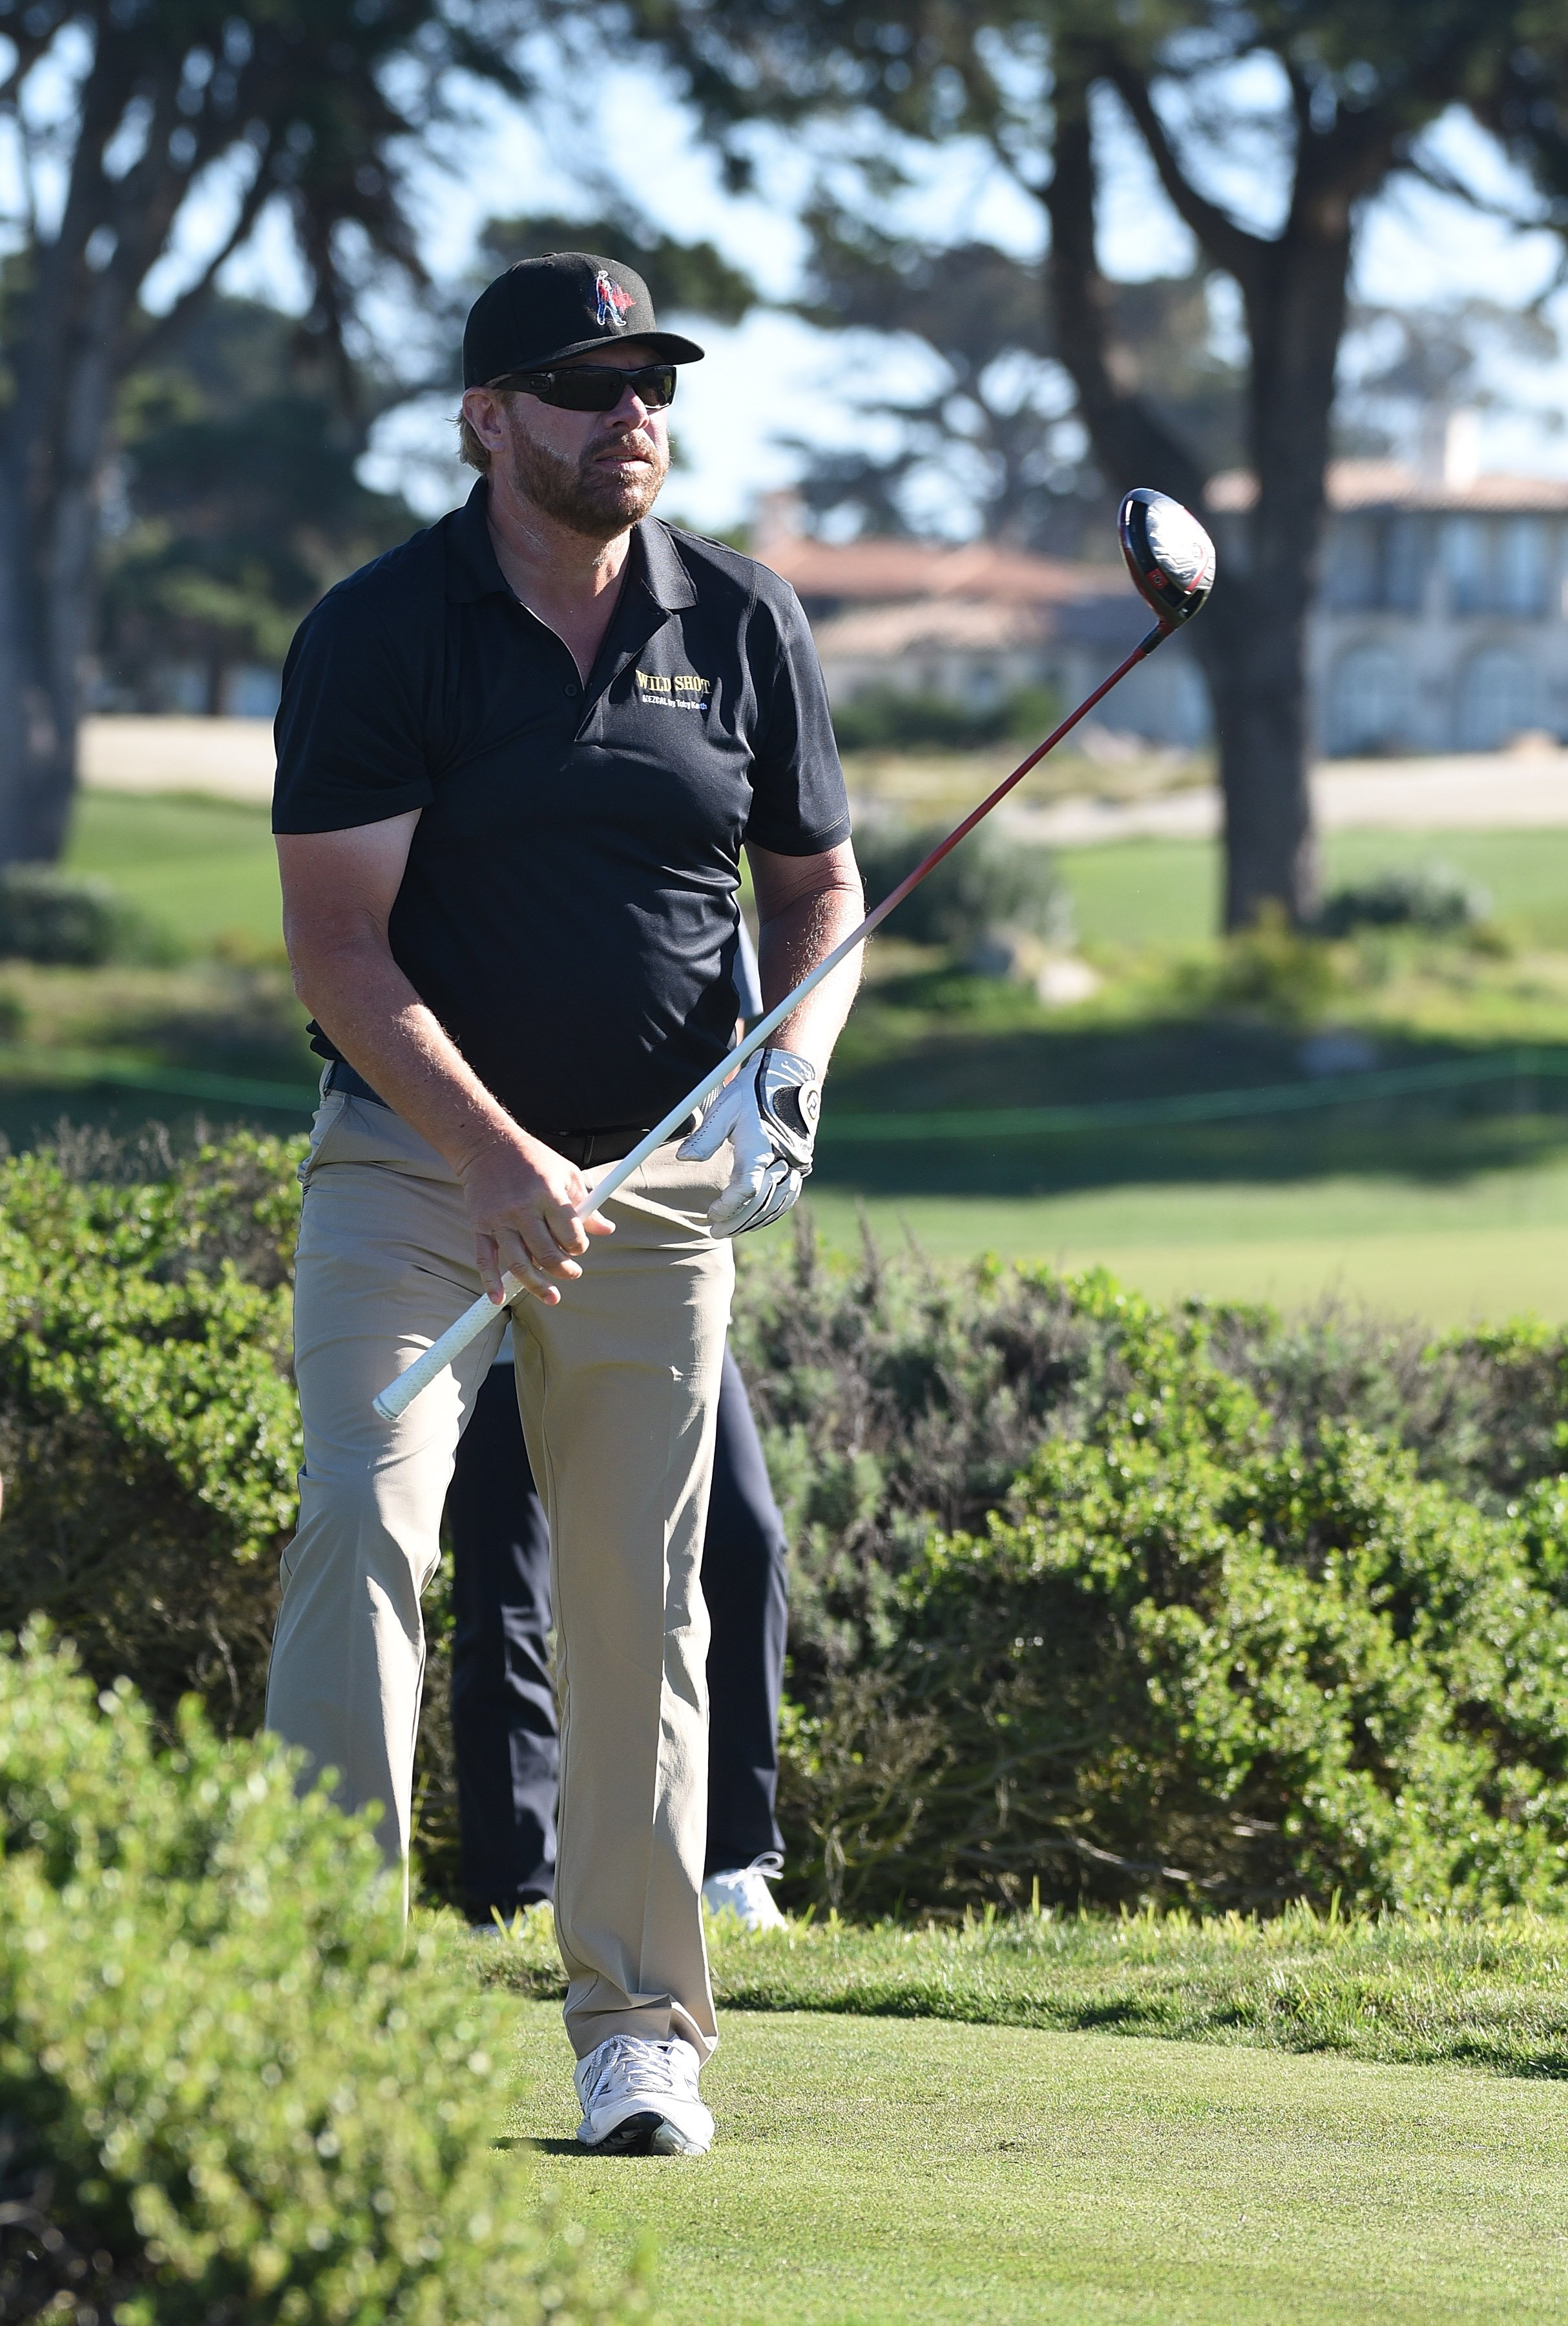 Toby Keith is seen during the 2018 AT&T Pebble Beach Pro-Am on February 9, 2018, in Pebble Beach, California. | Source: Getty Images